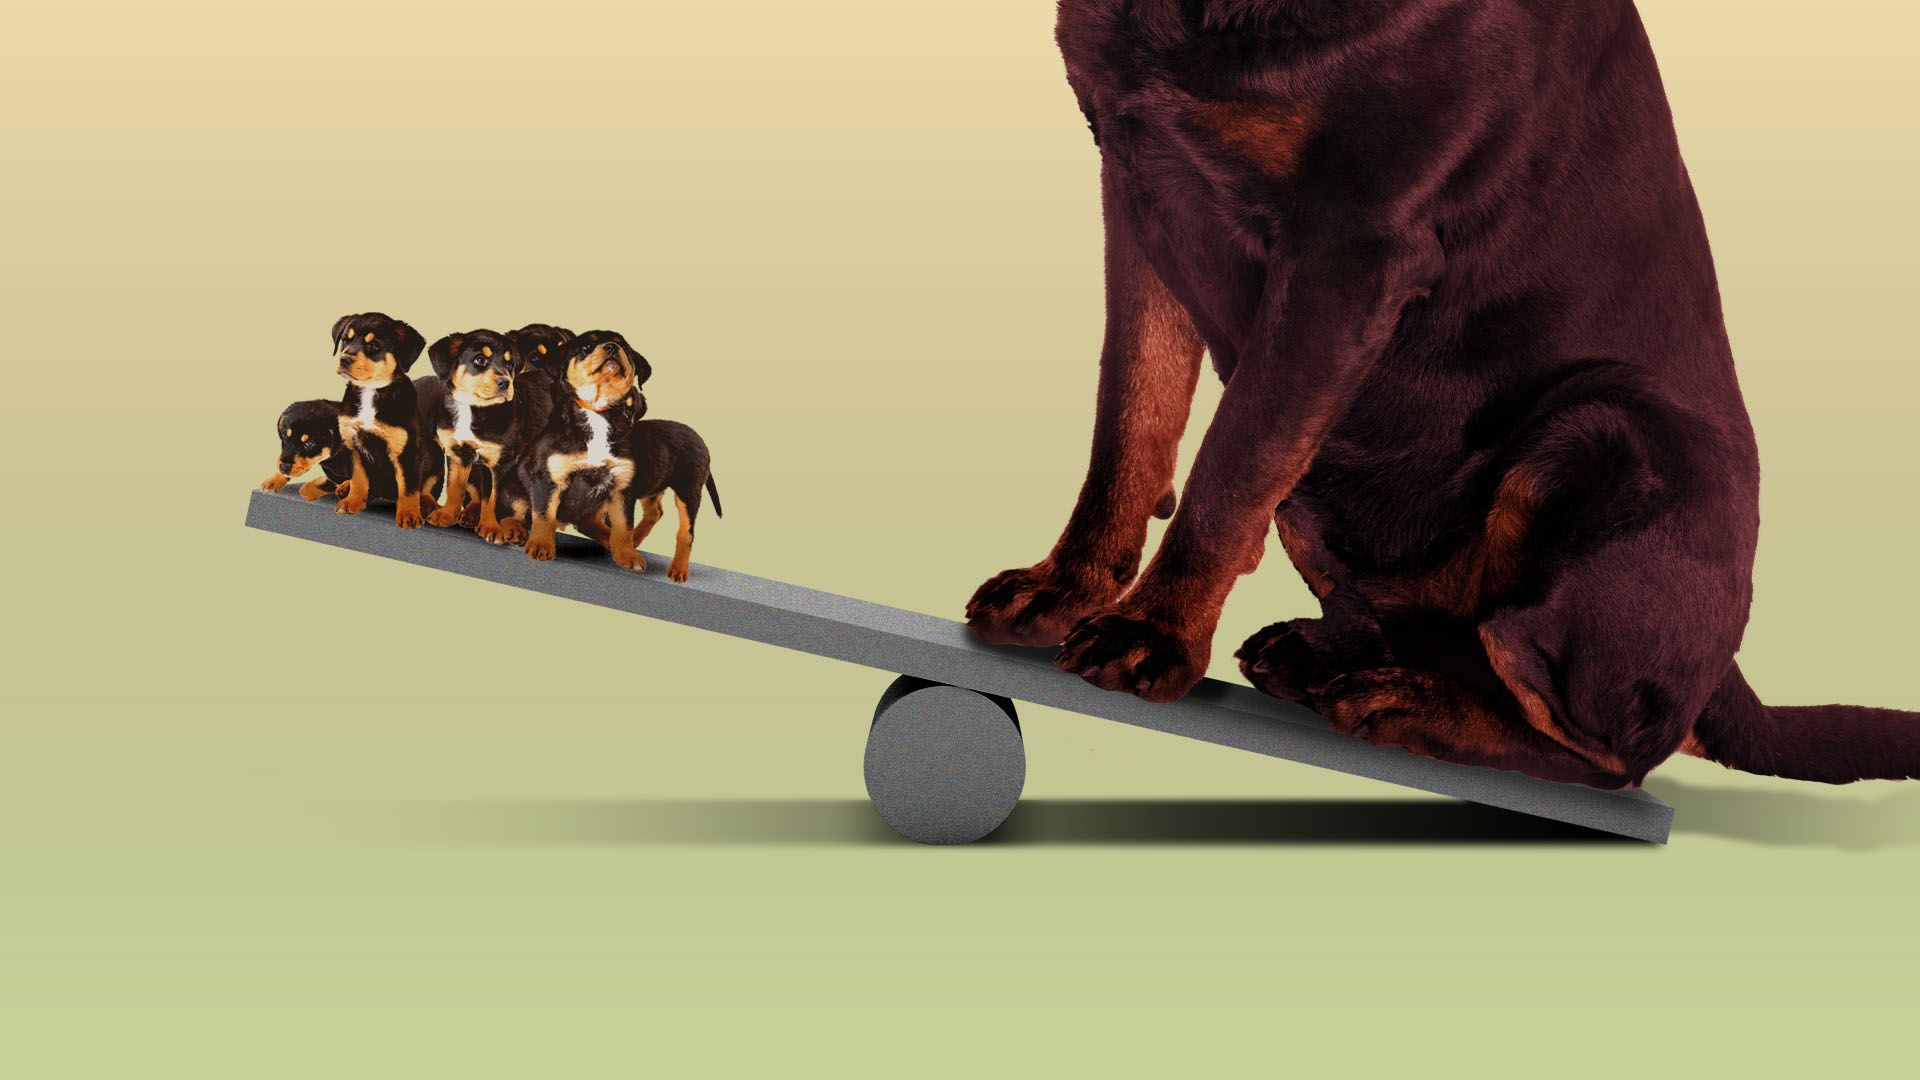 Illustration of a seesaw with a giant dog on one side and a bunch of puppies on the other side